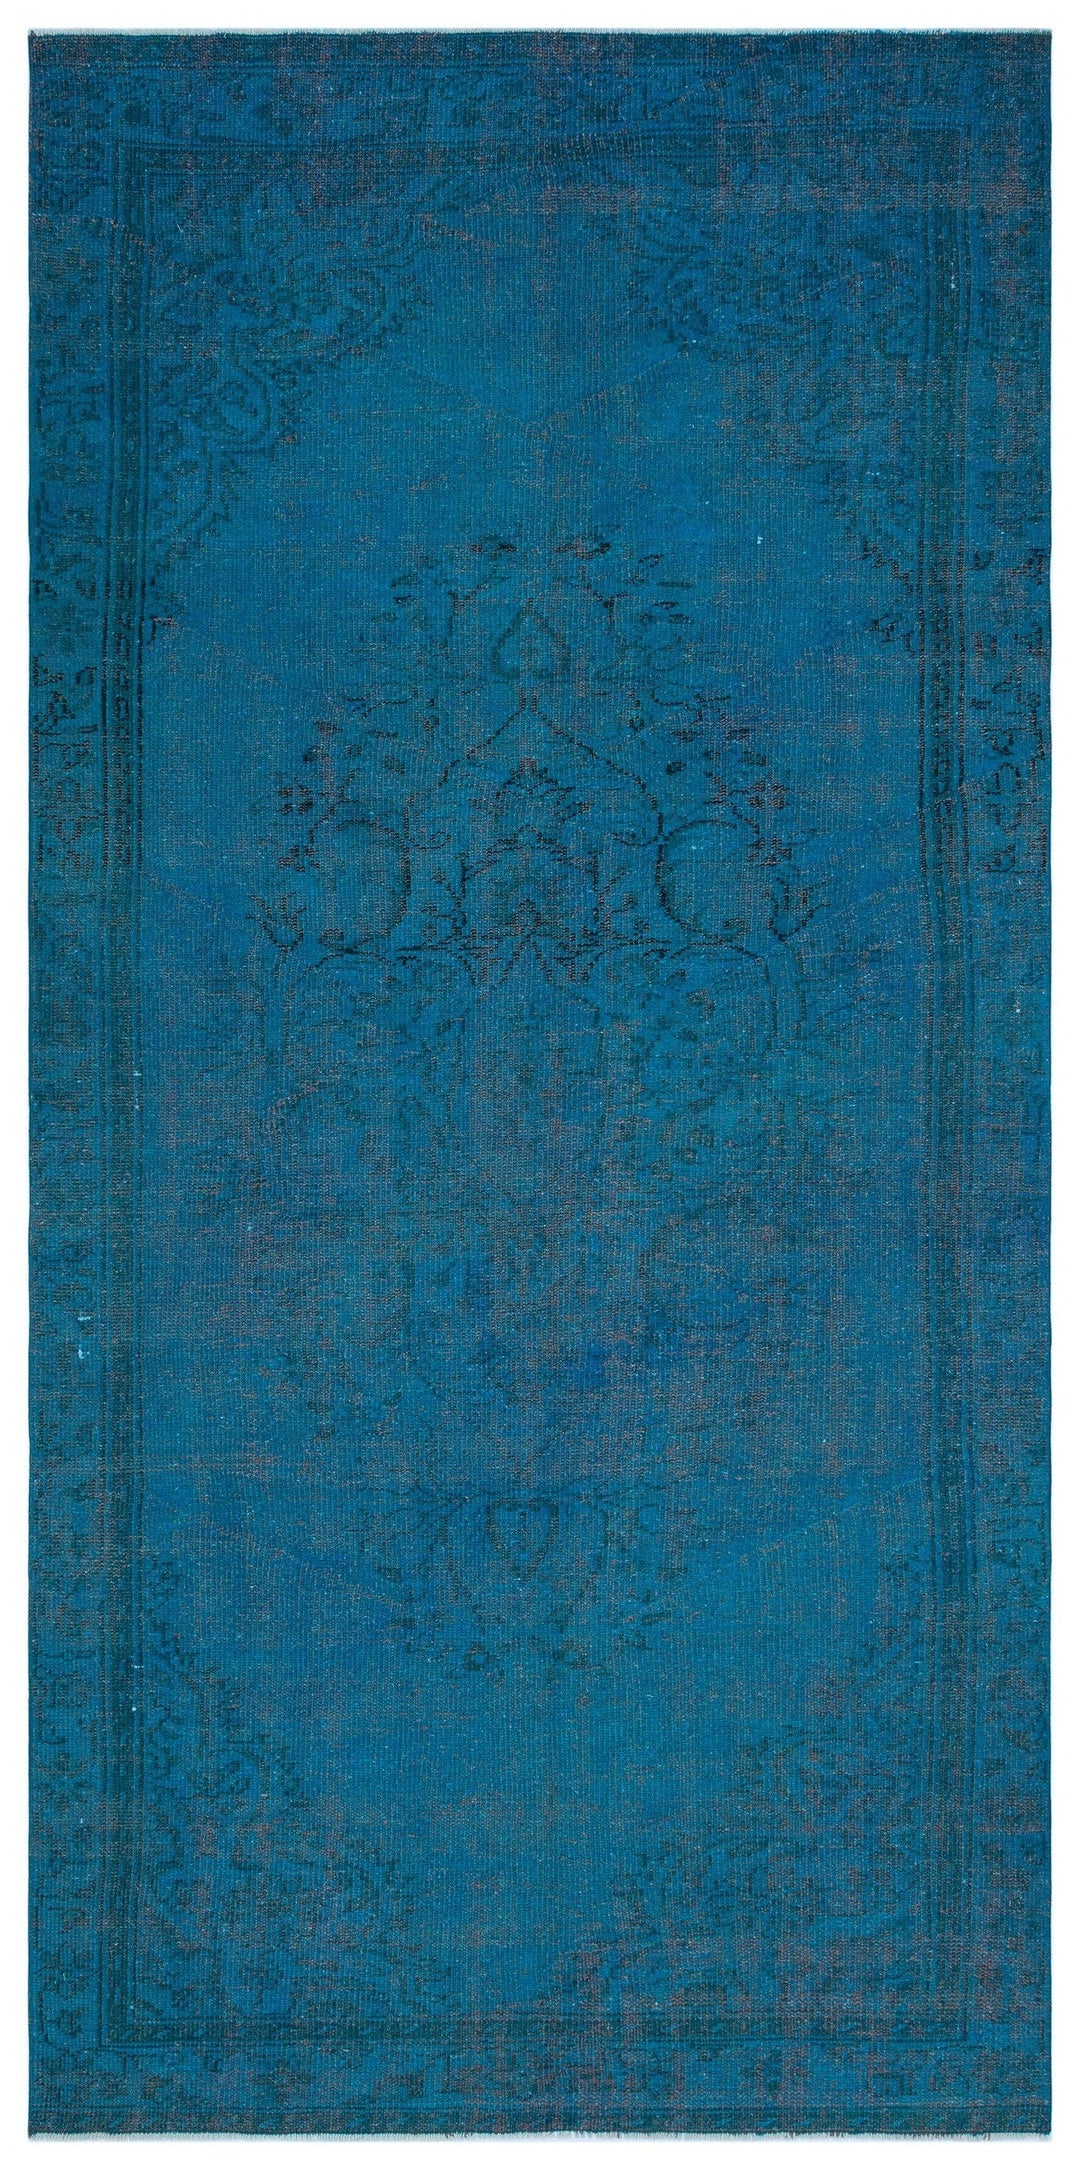 Athens Turquoise Tumbled Wool Hand Woven Carpet 146 x 297